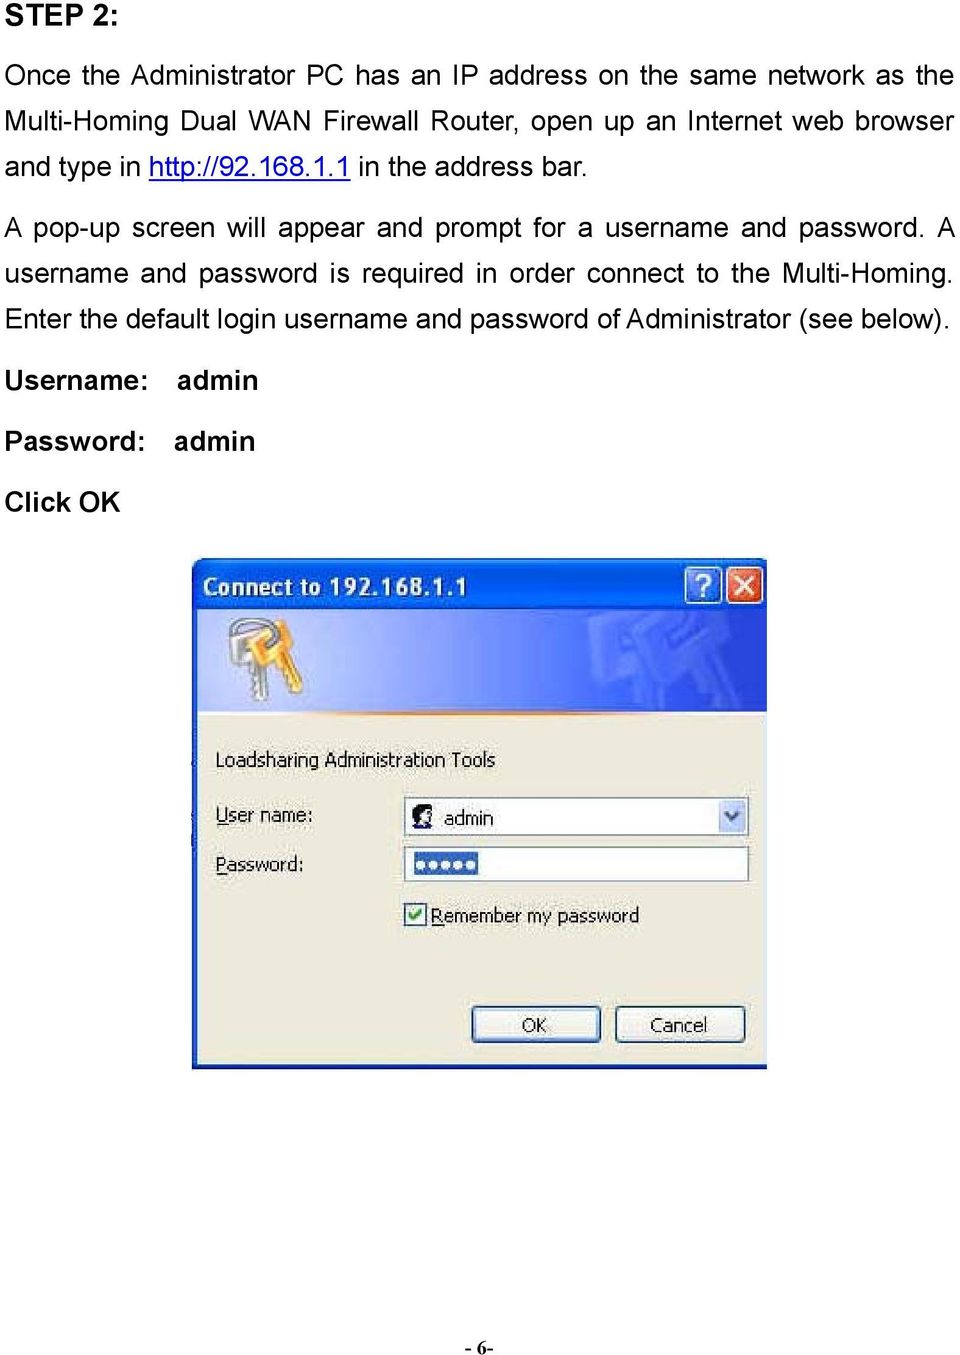 A pop-up screen will appear and prompt for a username and password.